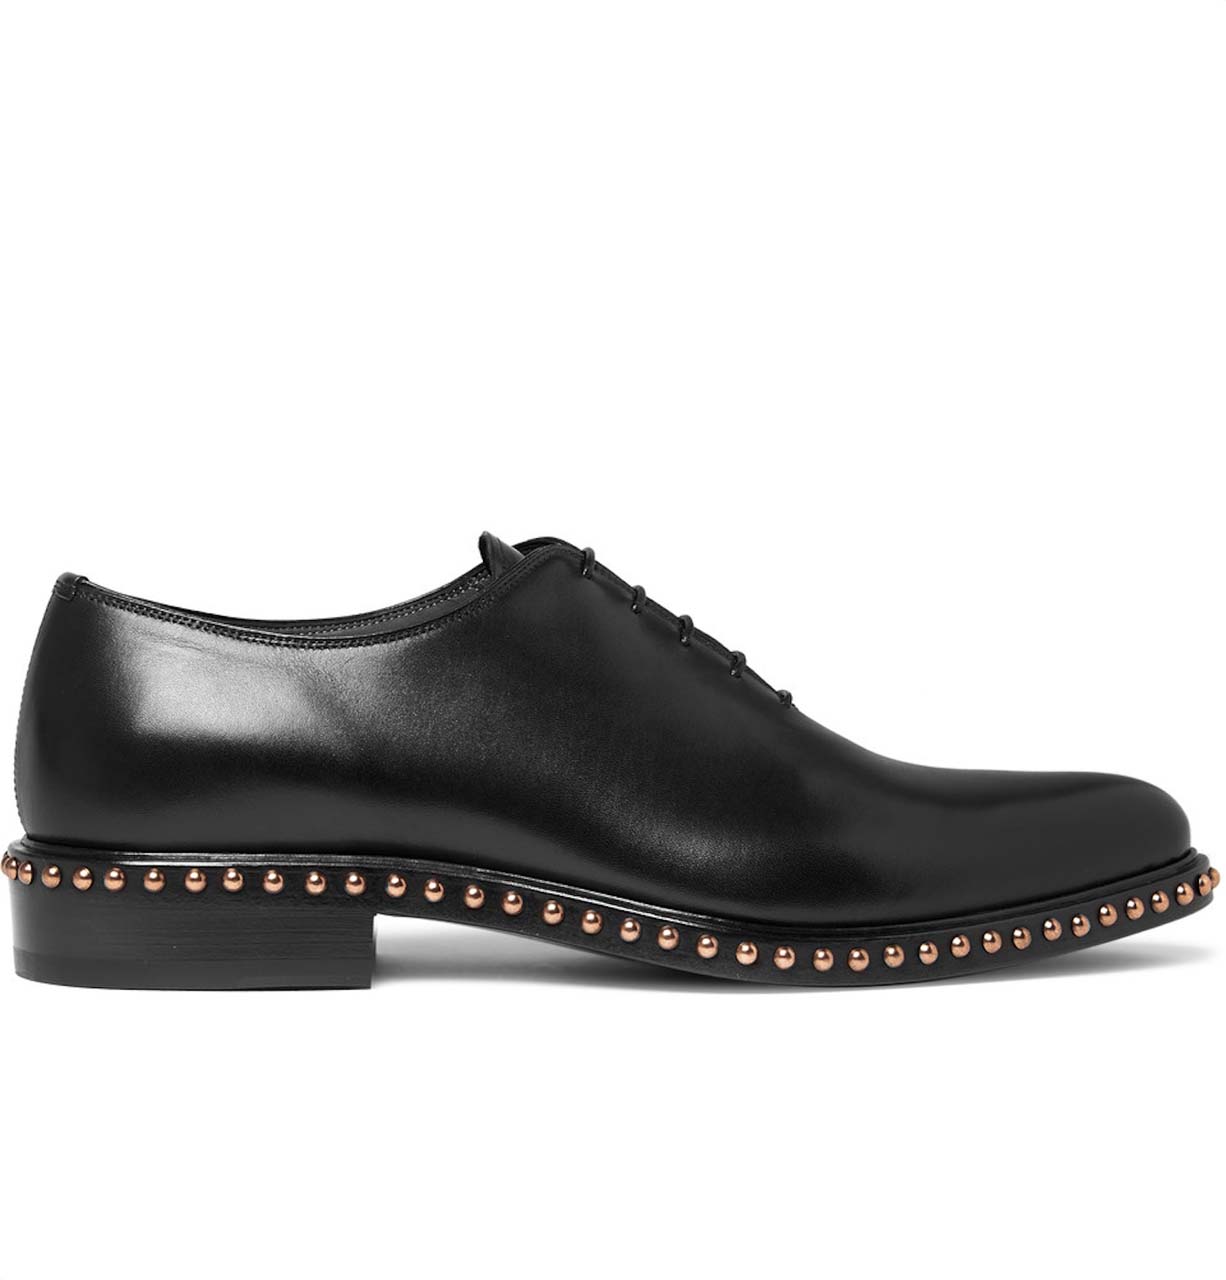 Givenchy Studded Leather Oxford Shoes